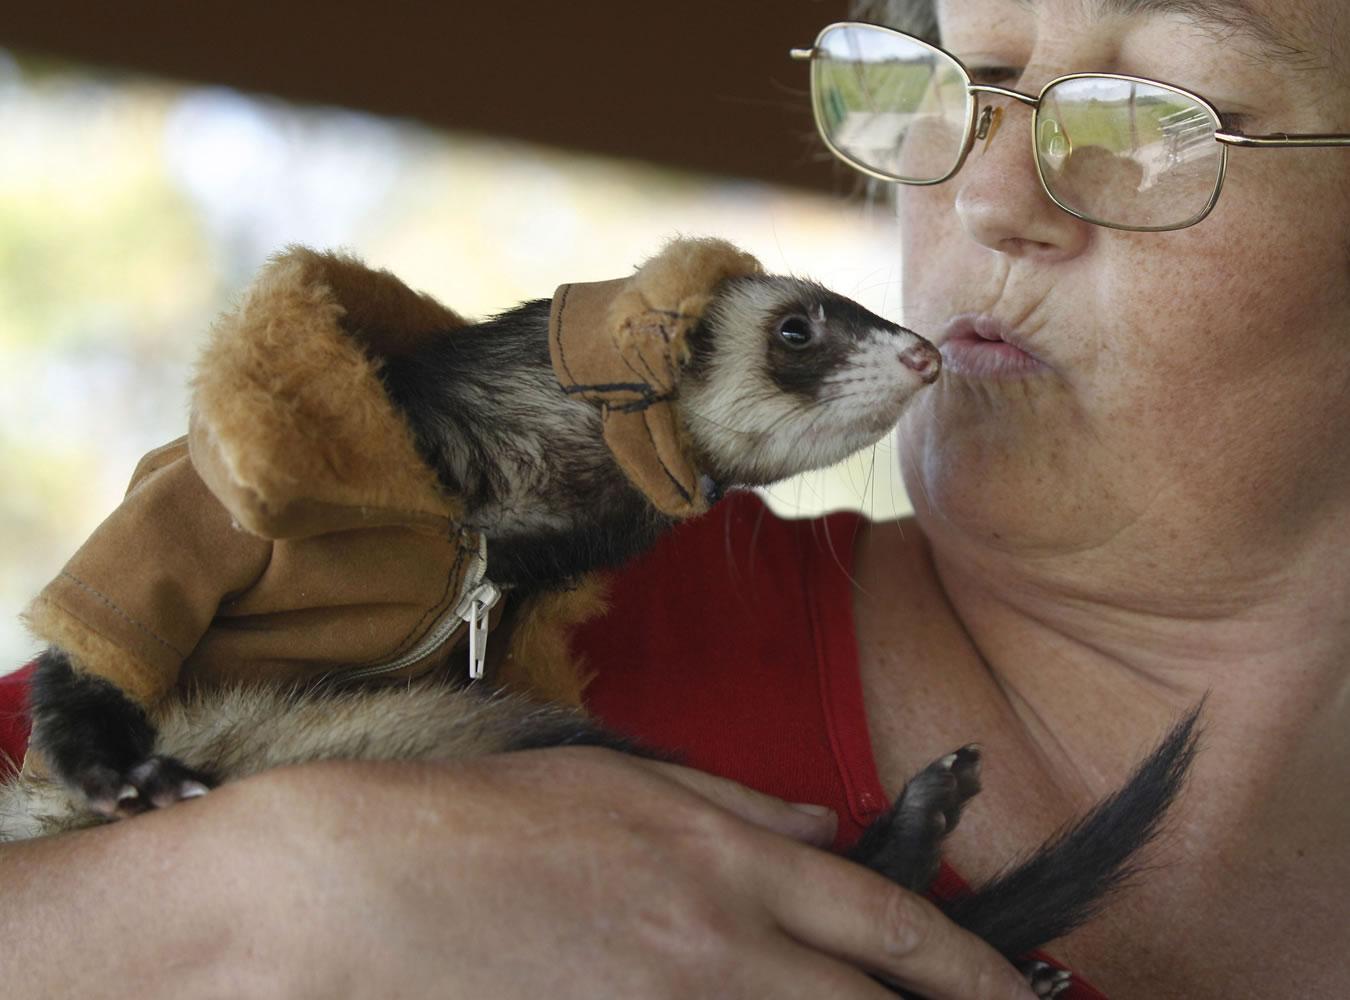 AmyJo Casner kisses her pet ferret, Manny, as he sits on her shoulder after dressing him in a bomber jacket and hat outfit she made for him in Harrisville, Pa.